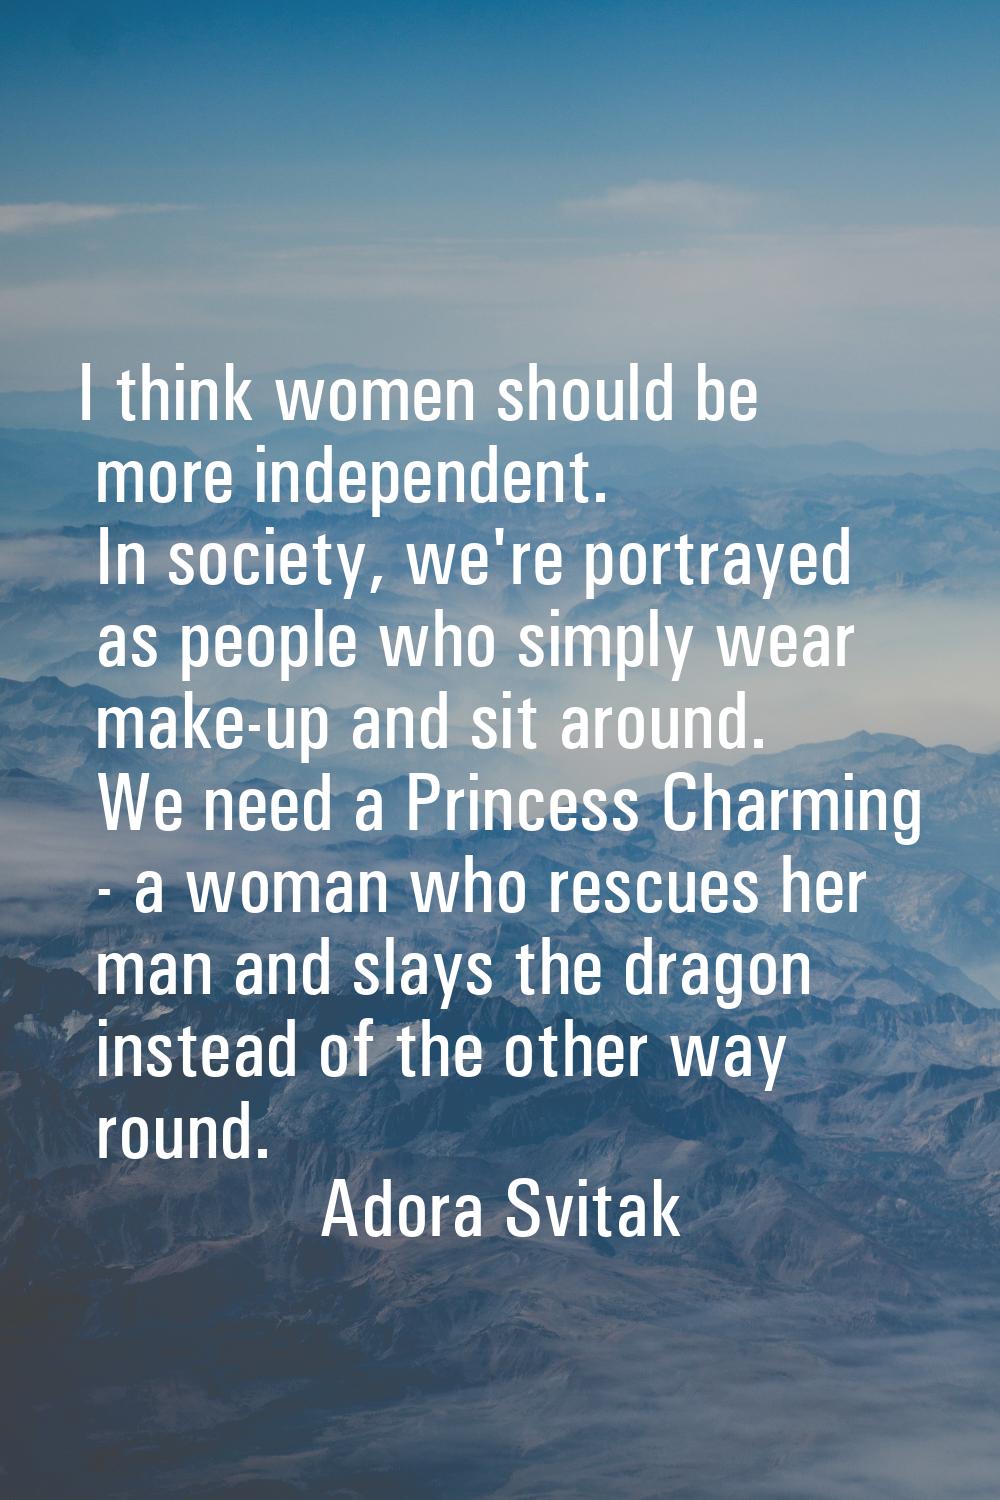 I think women should be more independent. In society, we're portrayed as people who simply wear mak